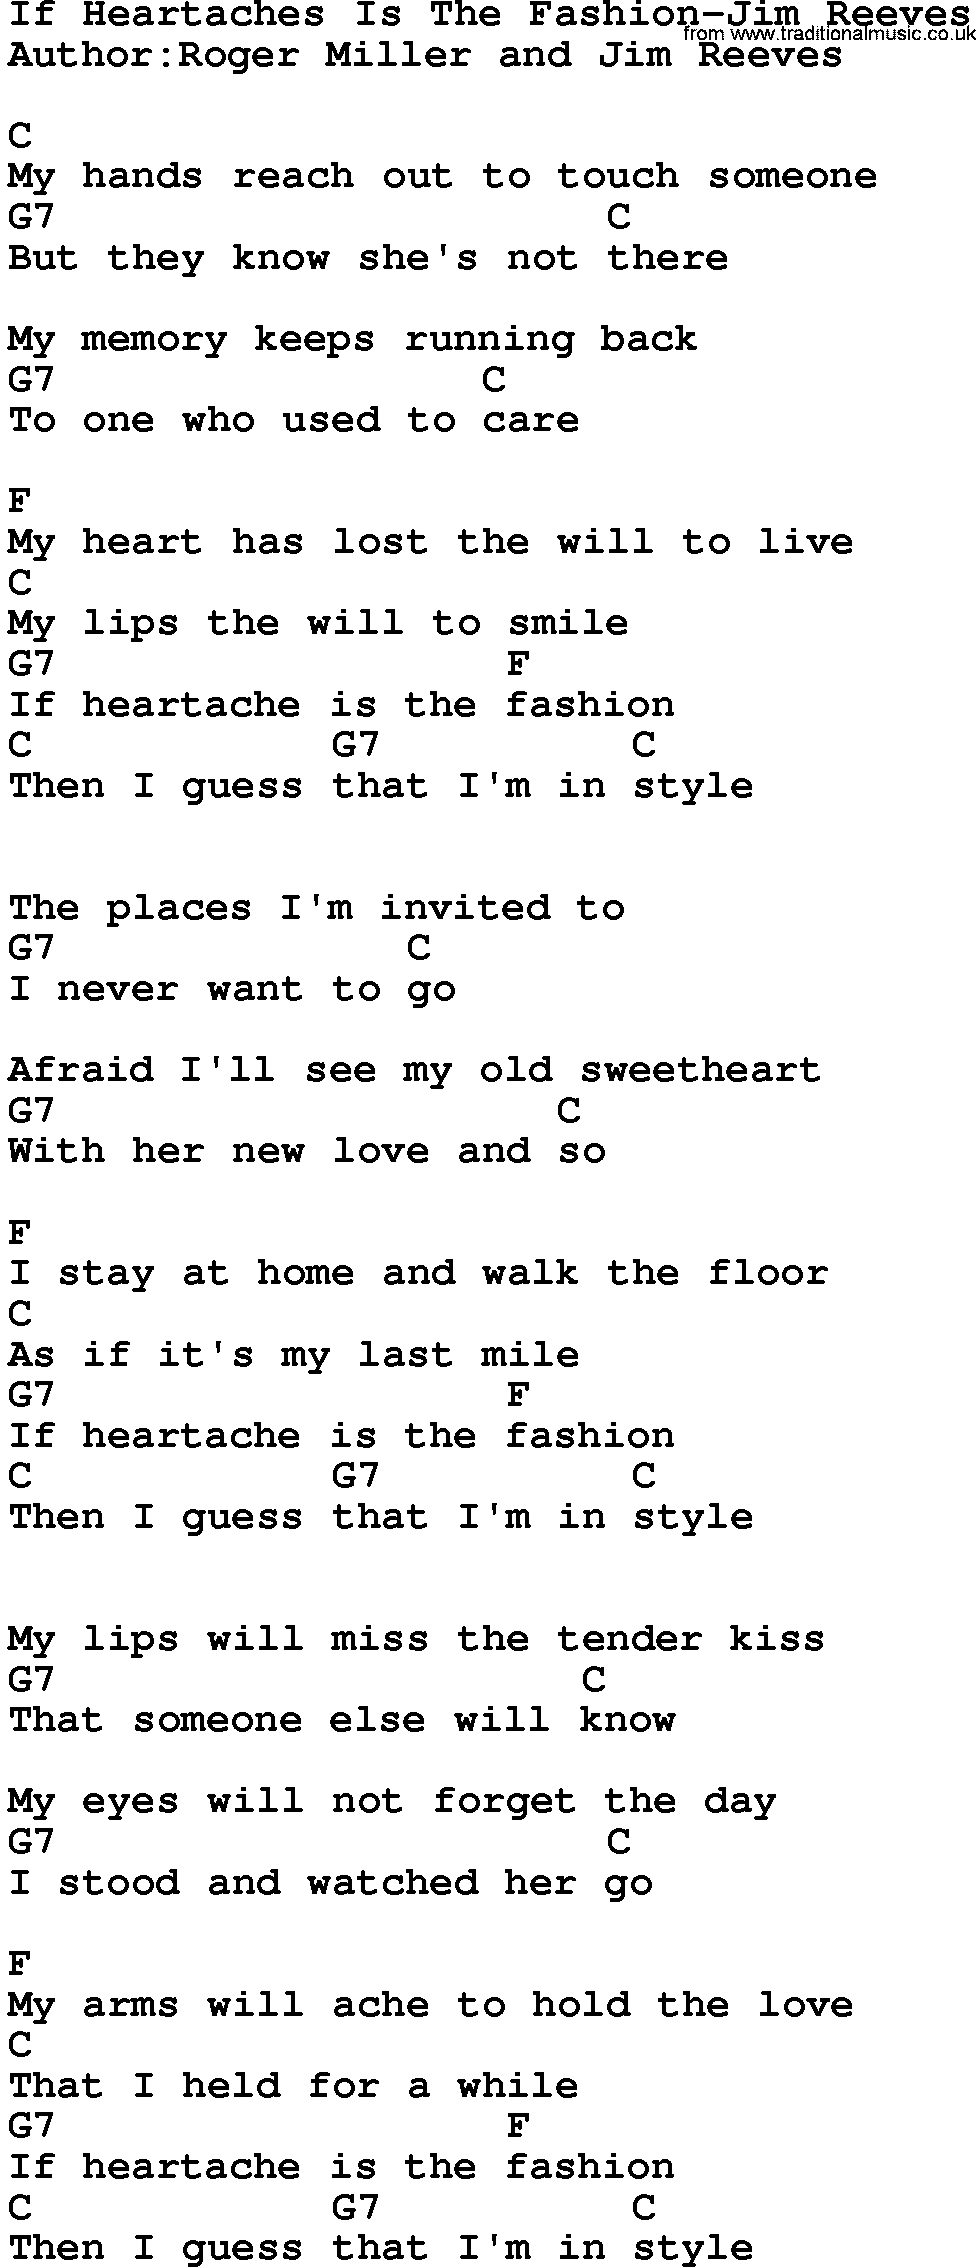 Country music song: If Heartaches Is The Fashion-Jim Reeves lyrics and chords